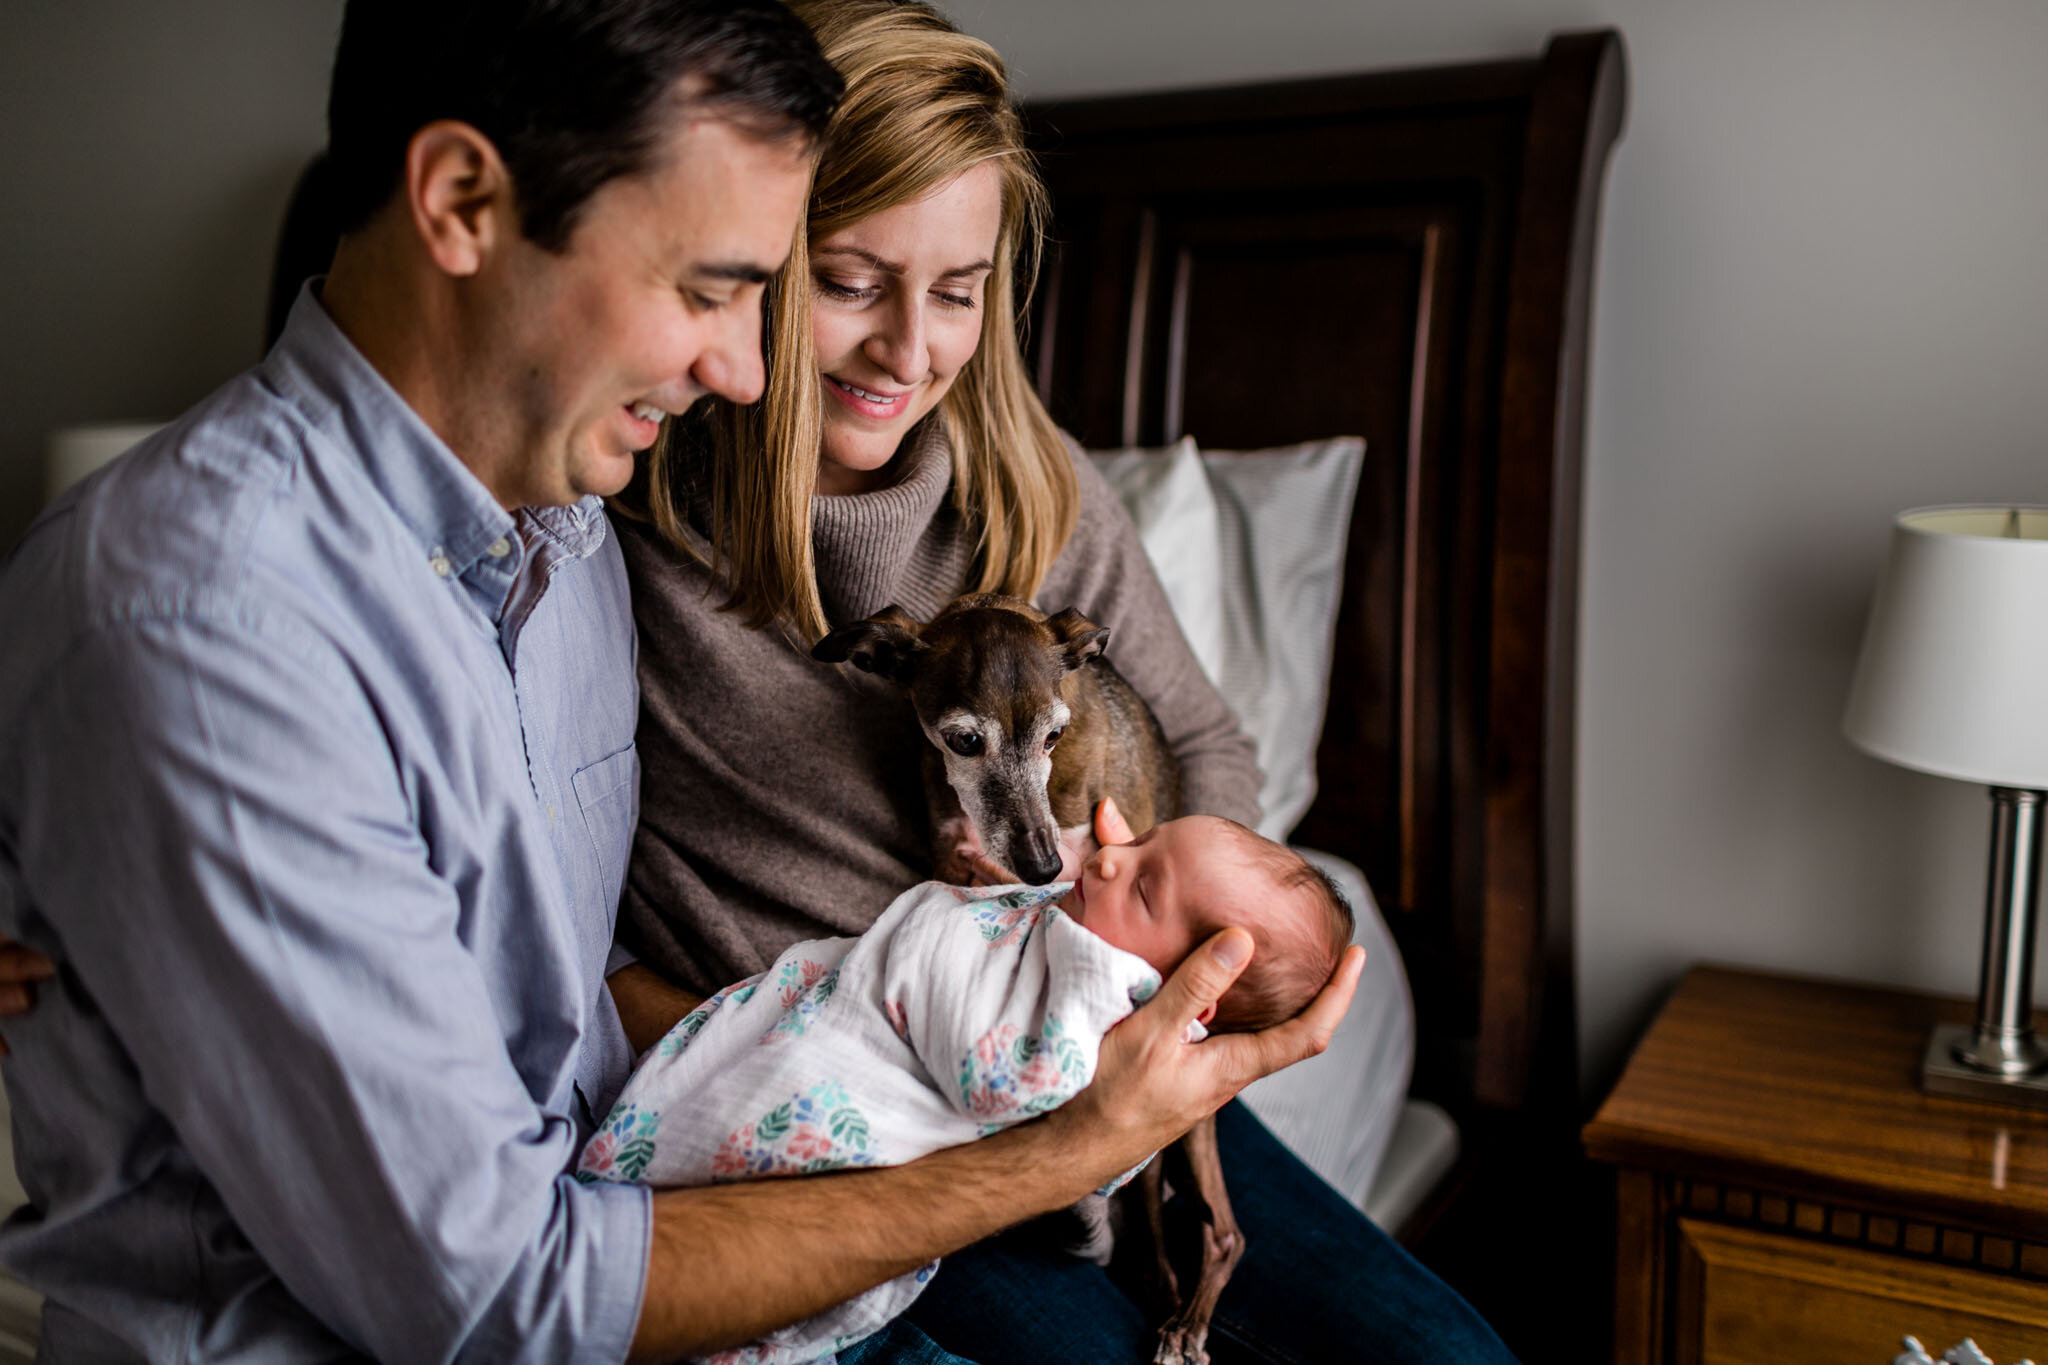 Durham Newborn Photographer | By G. Lin Photography | Lifestyle newborn session at home